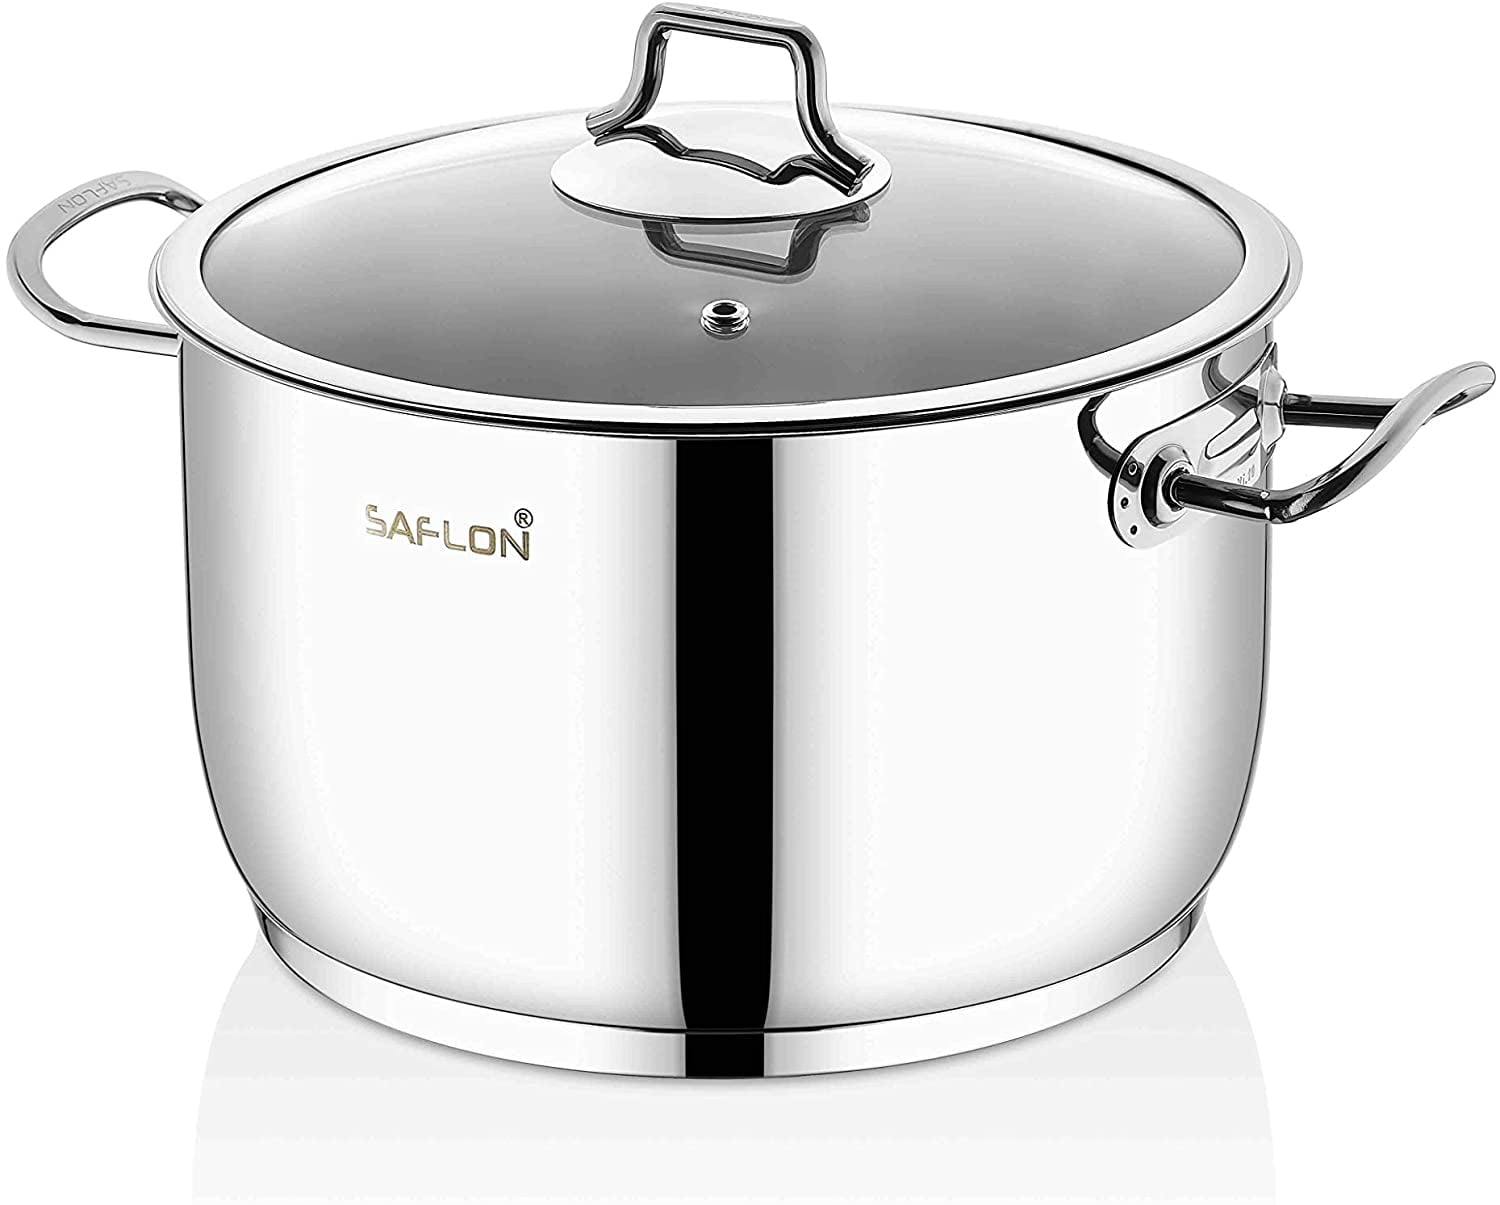 Saflon Stainless Steel Tri-Ply Capsulated Bottom 4 Quart Saute Pot with Glass Lid, Induction Ready, Oven and Dishwasher Safe